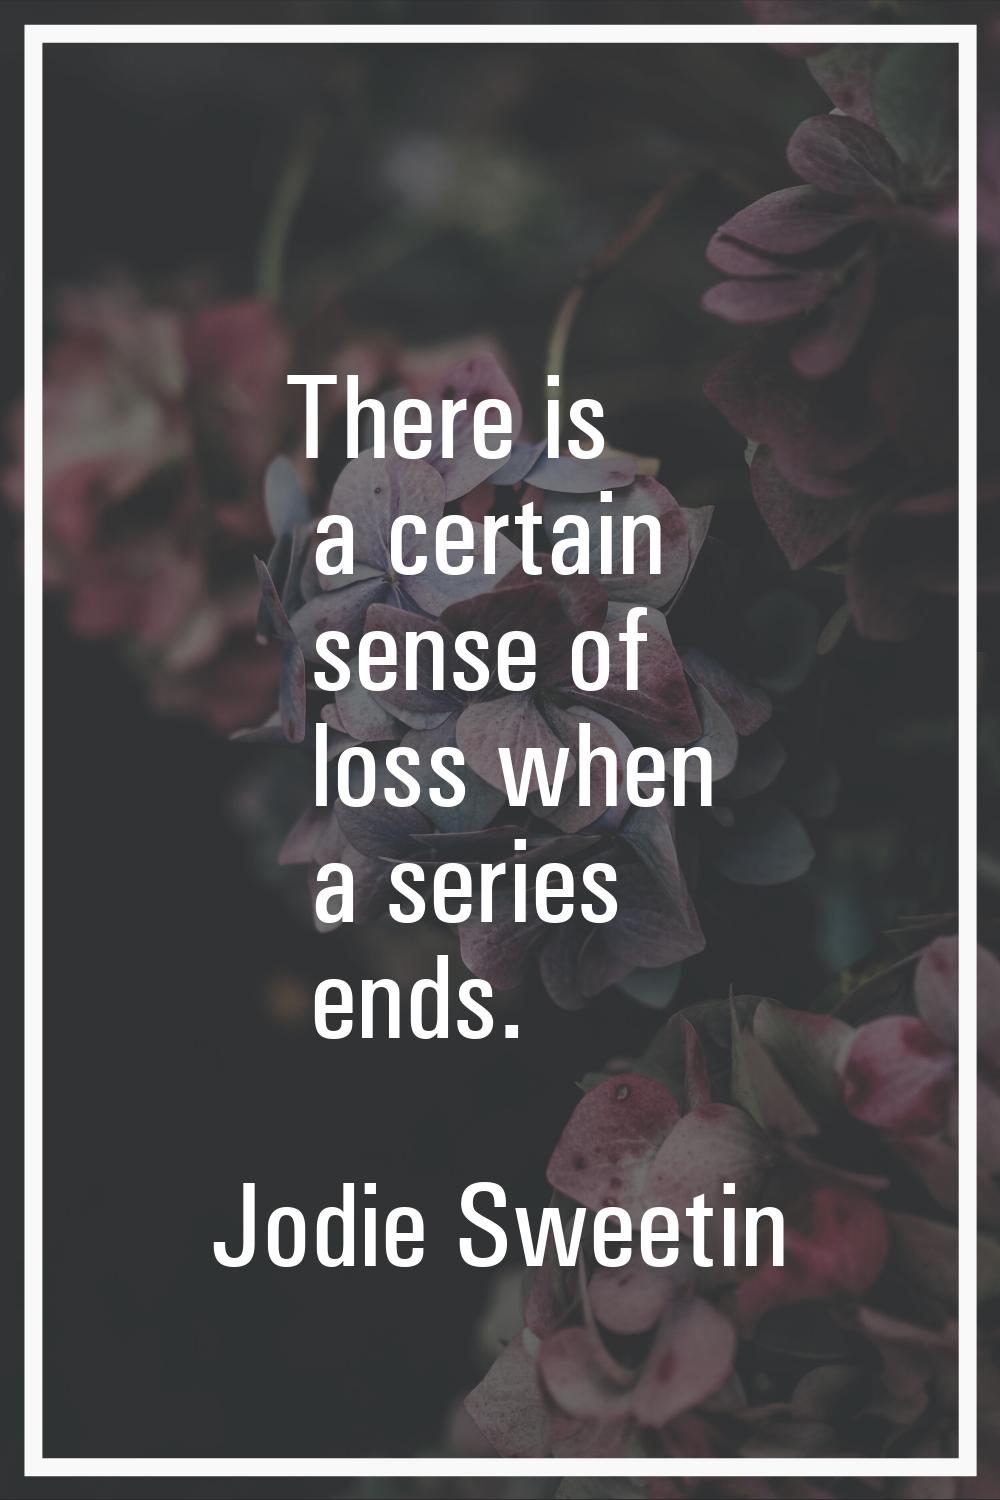 There is a certain sense of loss when a series ends.